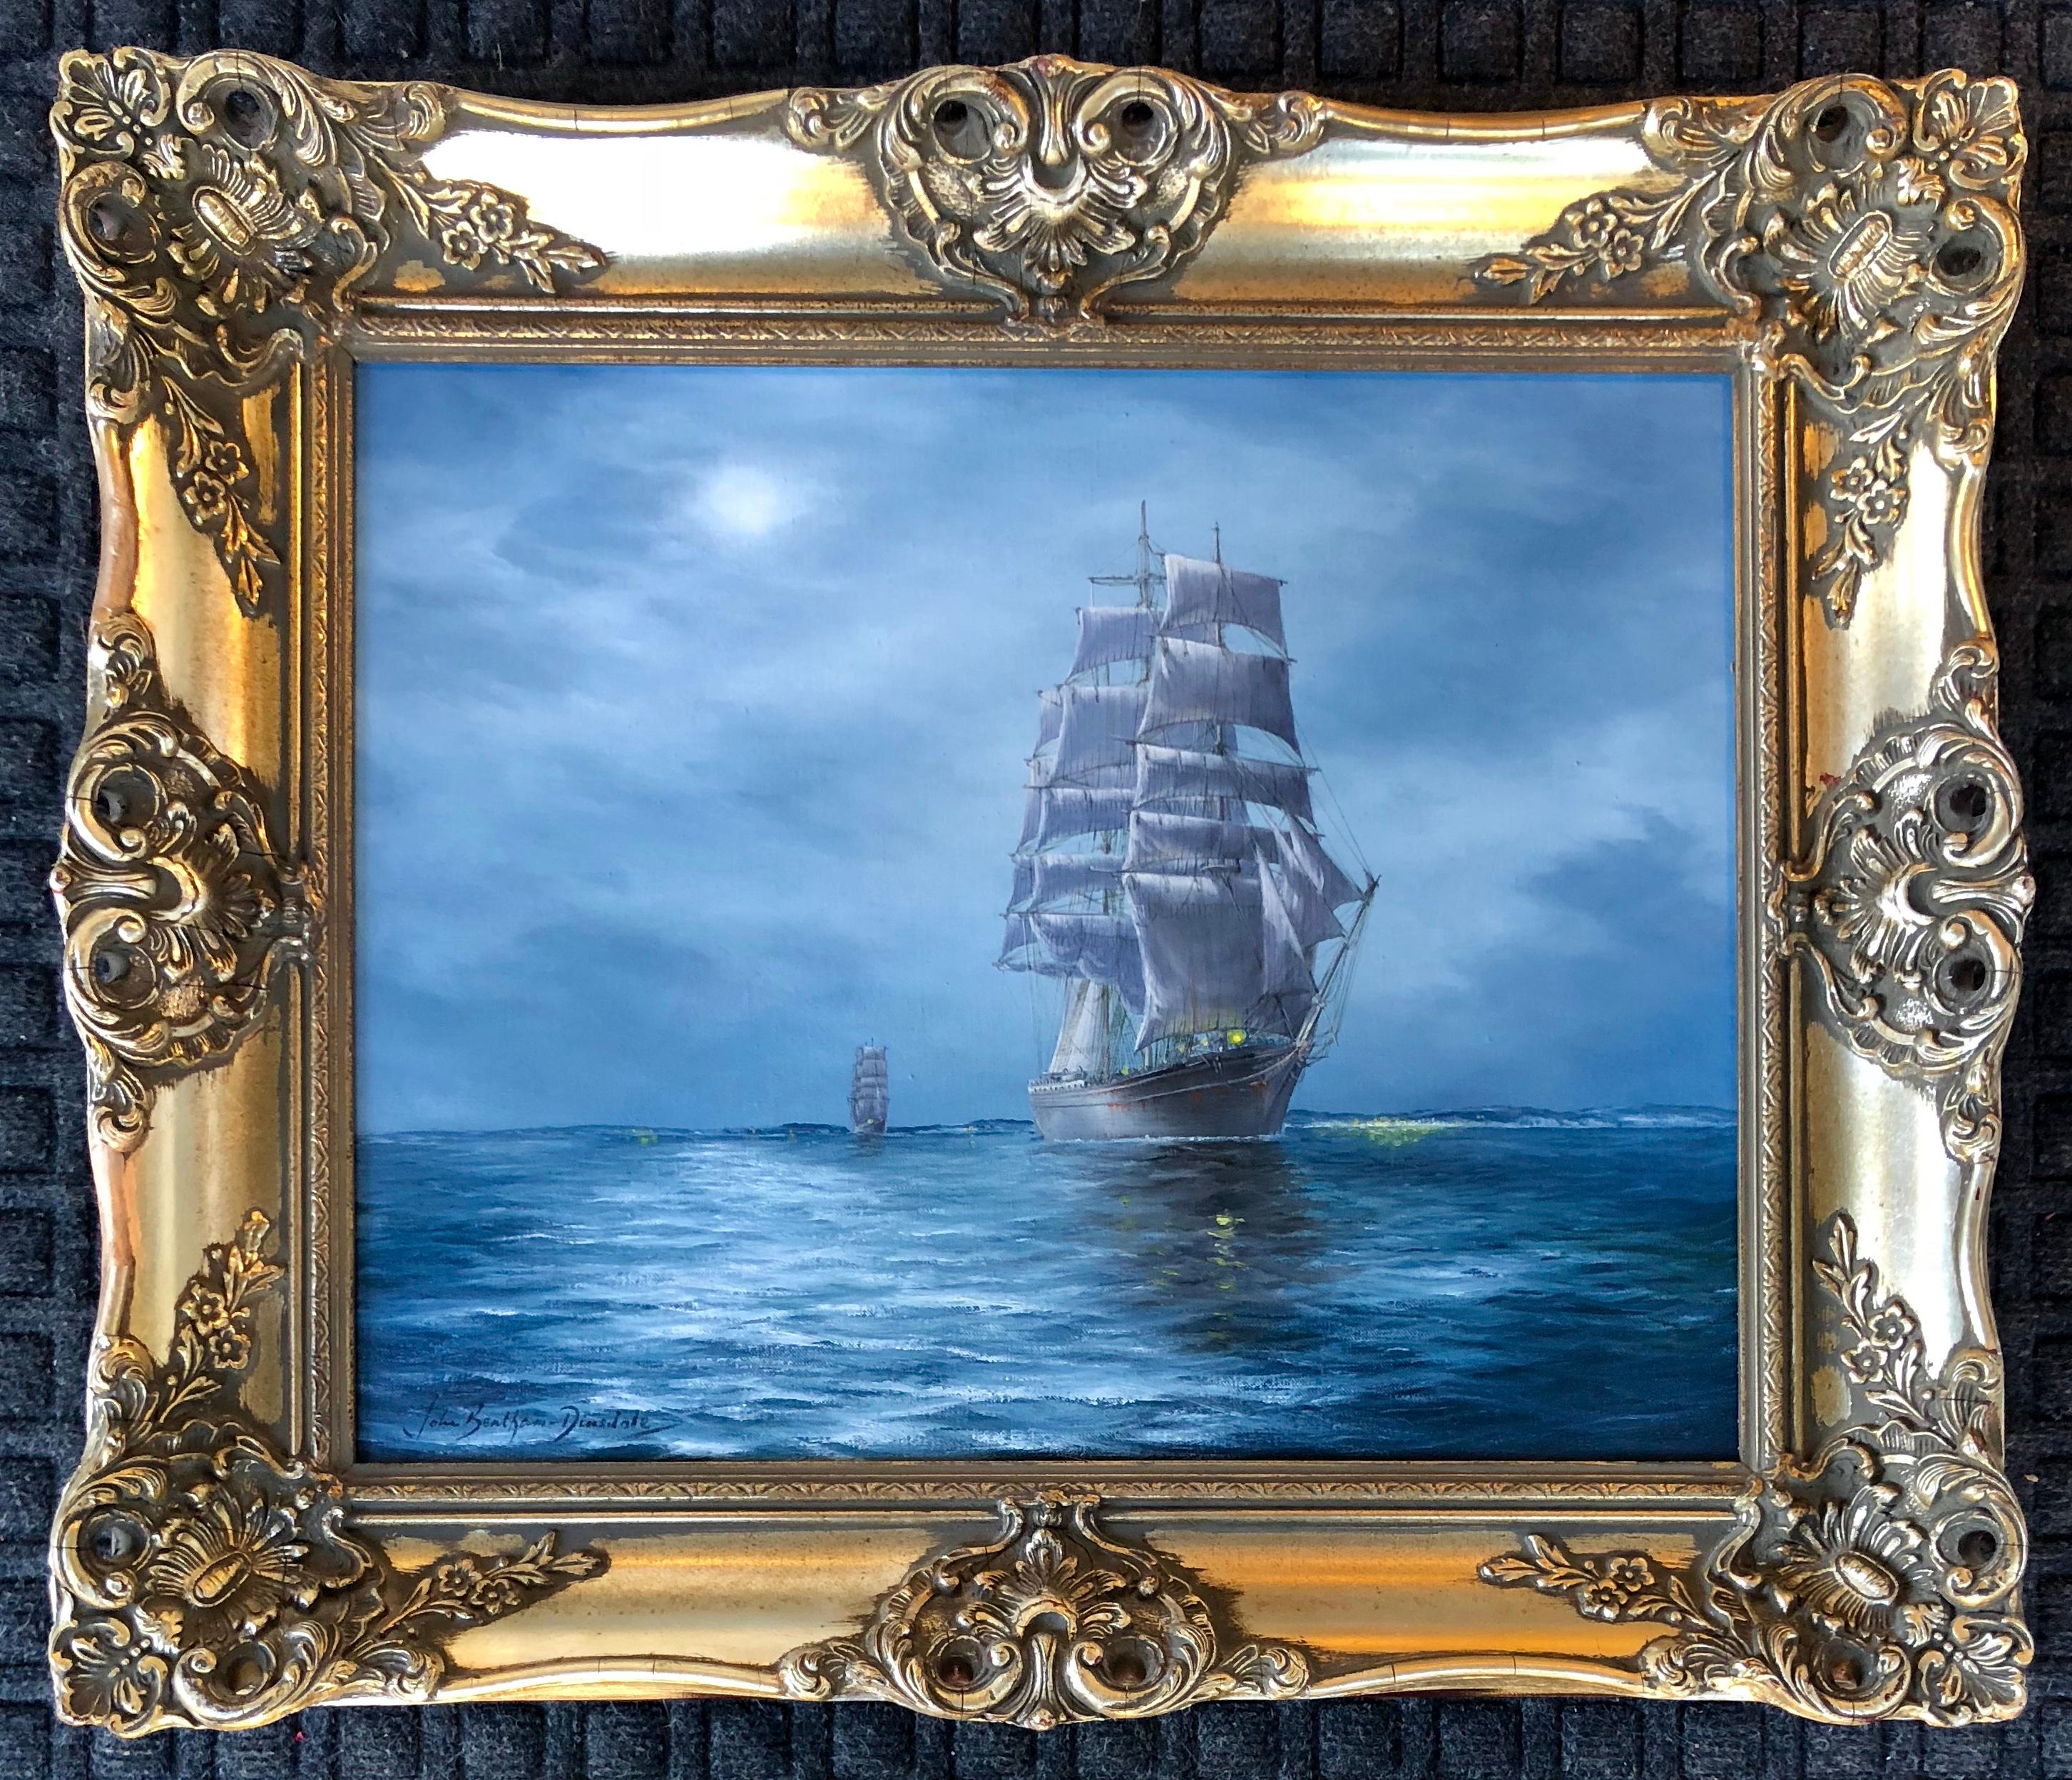 Signed lower left, oil on canvas and inscribed on back.

(Born in Yorkshire, England in 1927; died in 2008).

Dinsdale painted the sea and great ships of the era when “Britannia ruled the waves” with her fleets of clipper and fighting ships